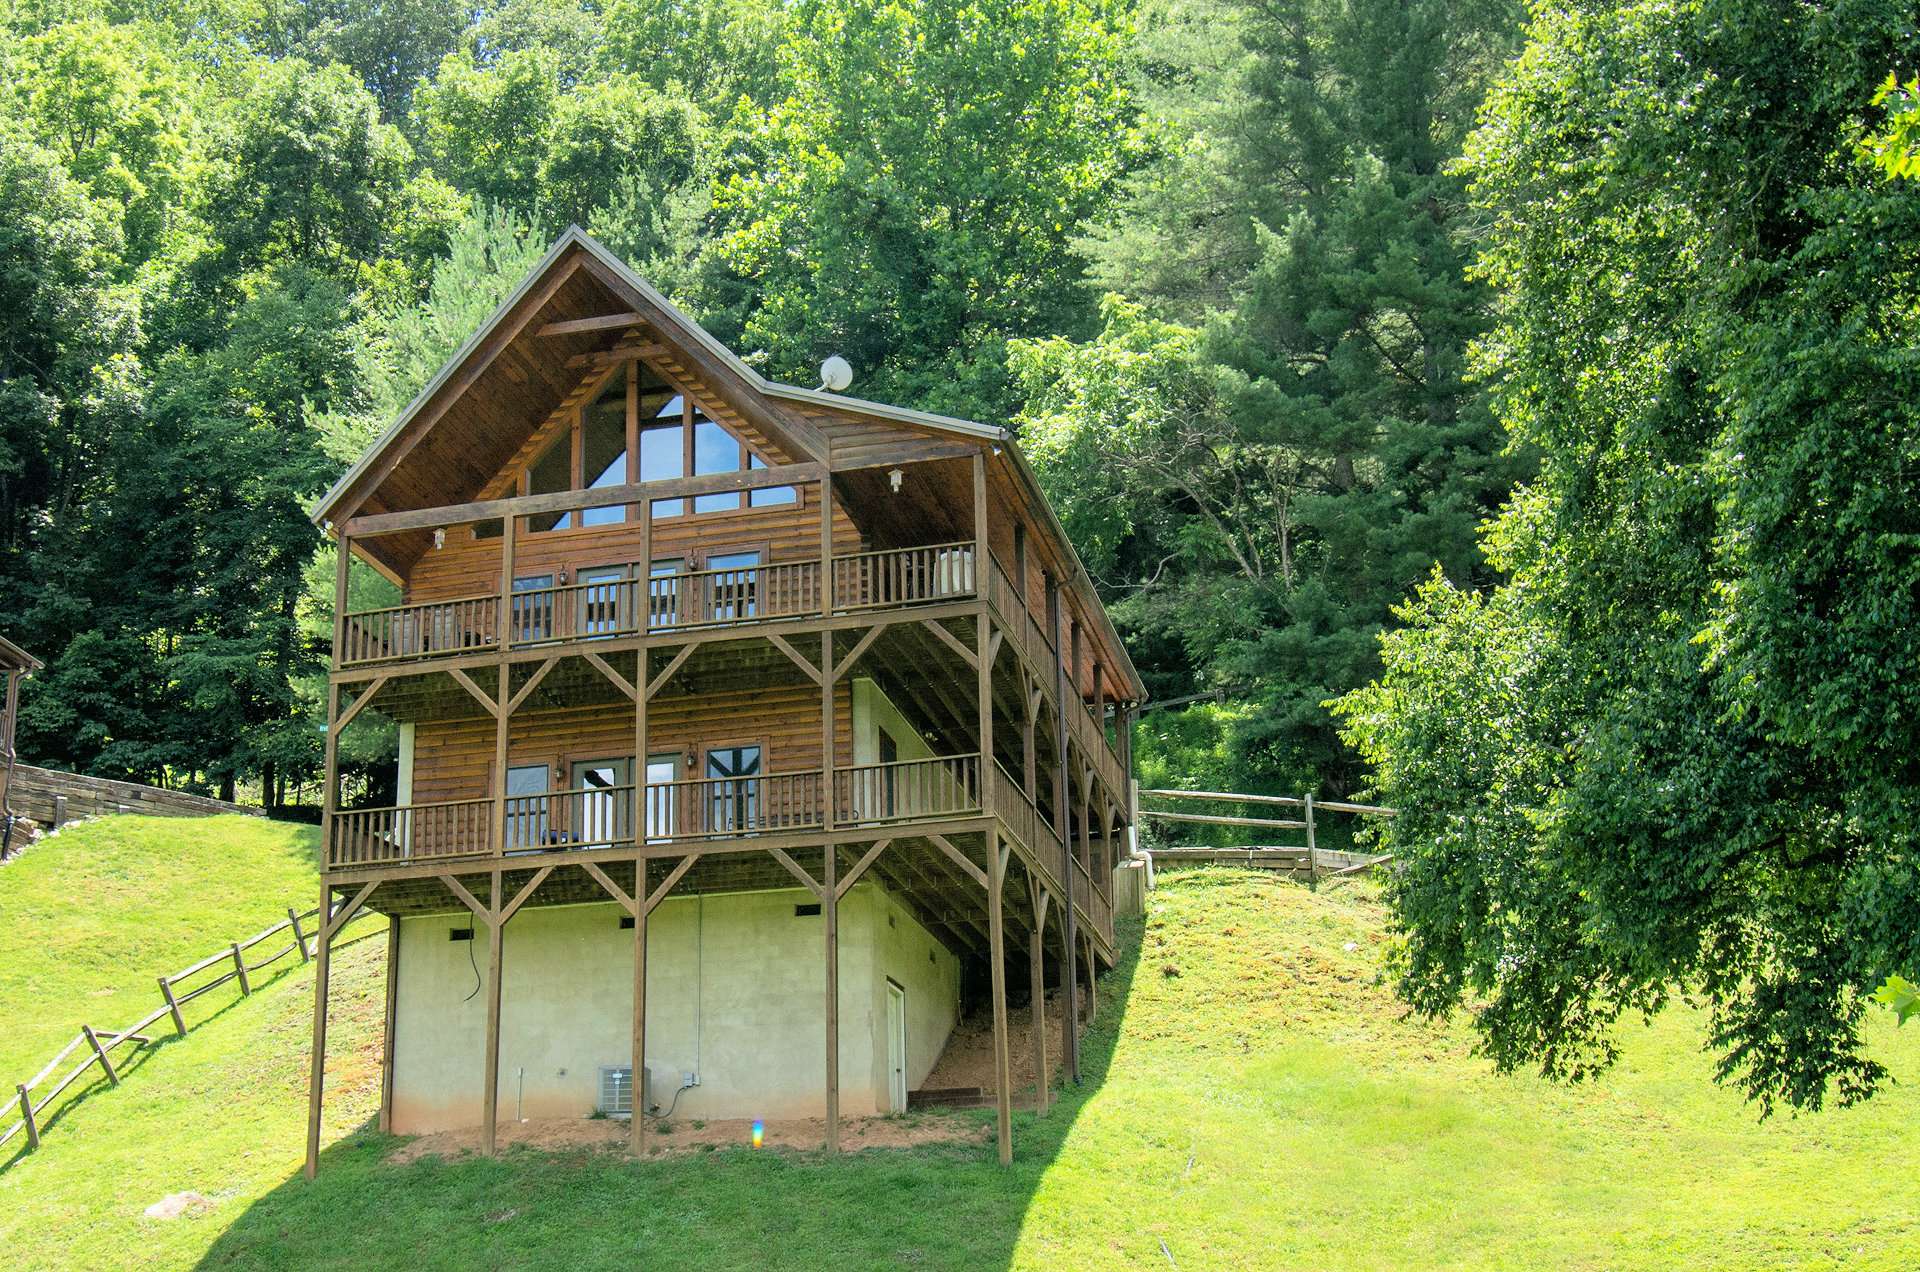 The location is 22 miles to Grayson Highlands or Mt. Jefferson State Park for hiking; and for shopping, dining & golf, 18 miles to Sparta, 20 miles to West Jefferson, 43 miles to Boone; 48 miles to Blowing Rock for skiing.  Call today for additional information or an appointment to view our listing B177.